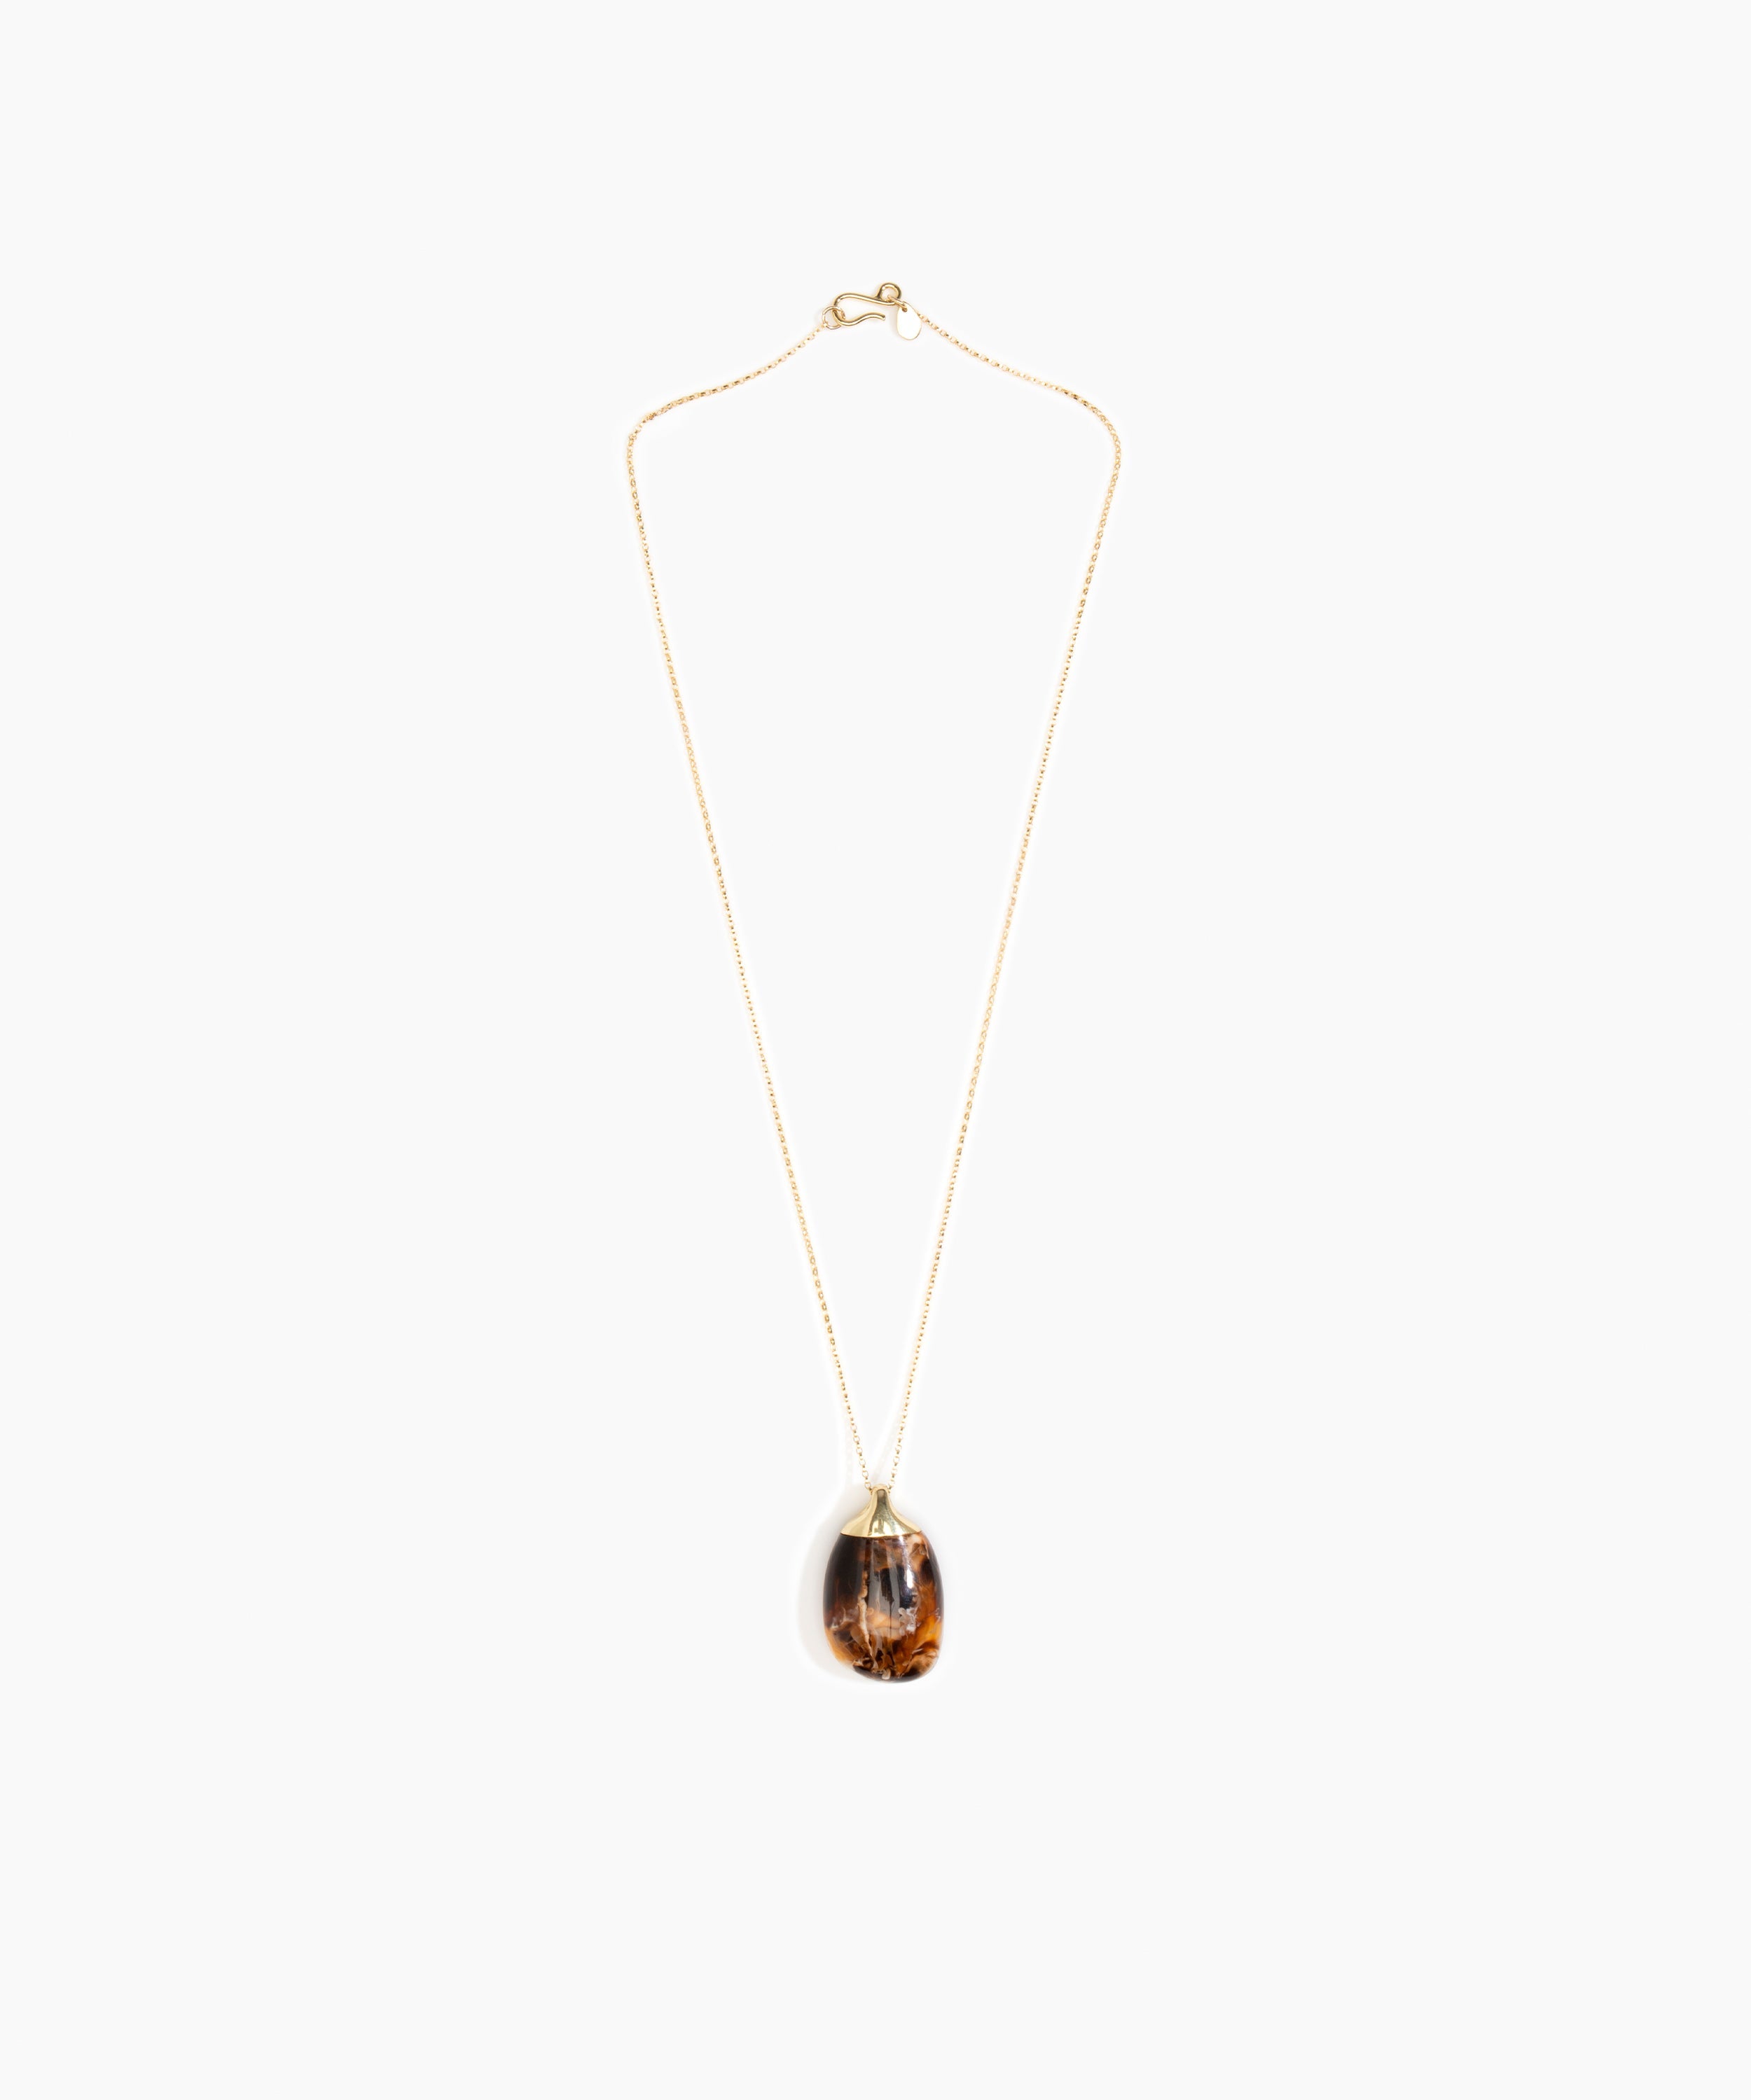 Dinosaur Designs Medium River Rock Pendant Necklaces in Light Horn Colour resin with Gold-Filled Material